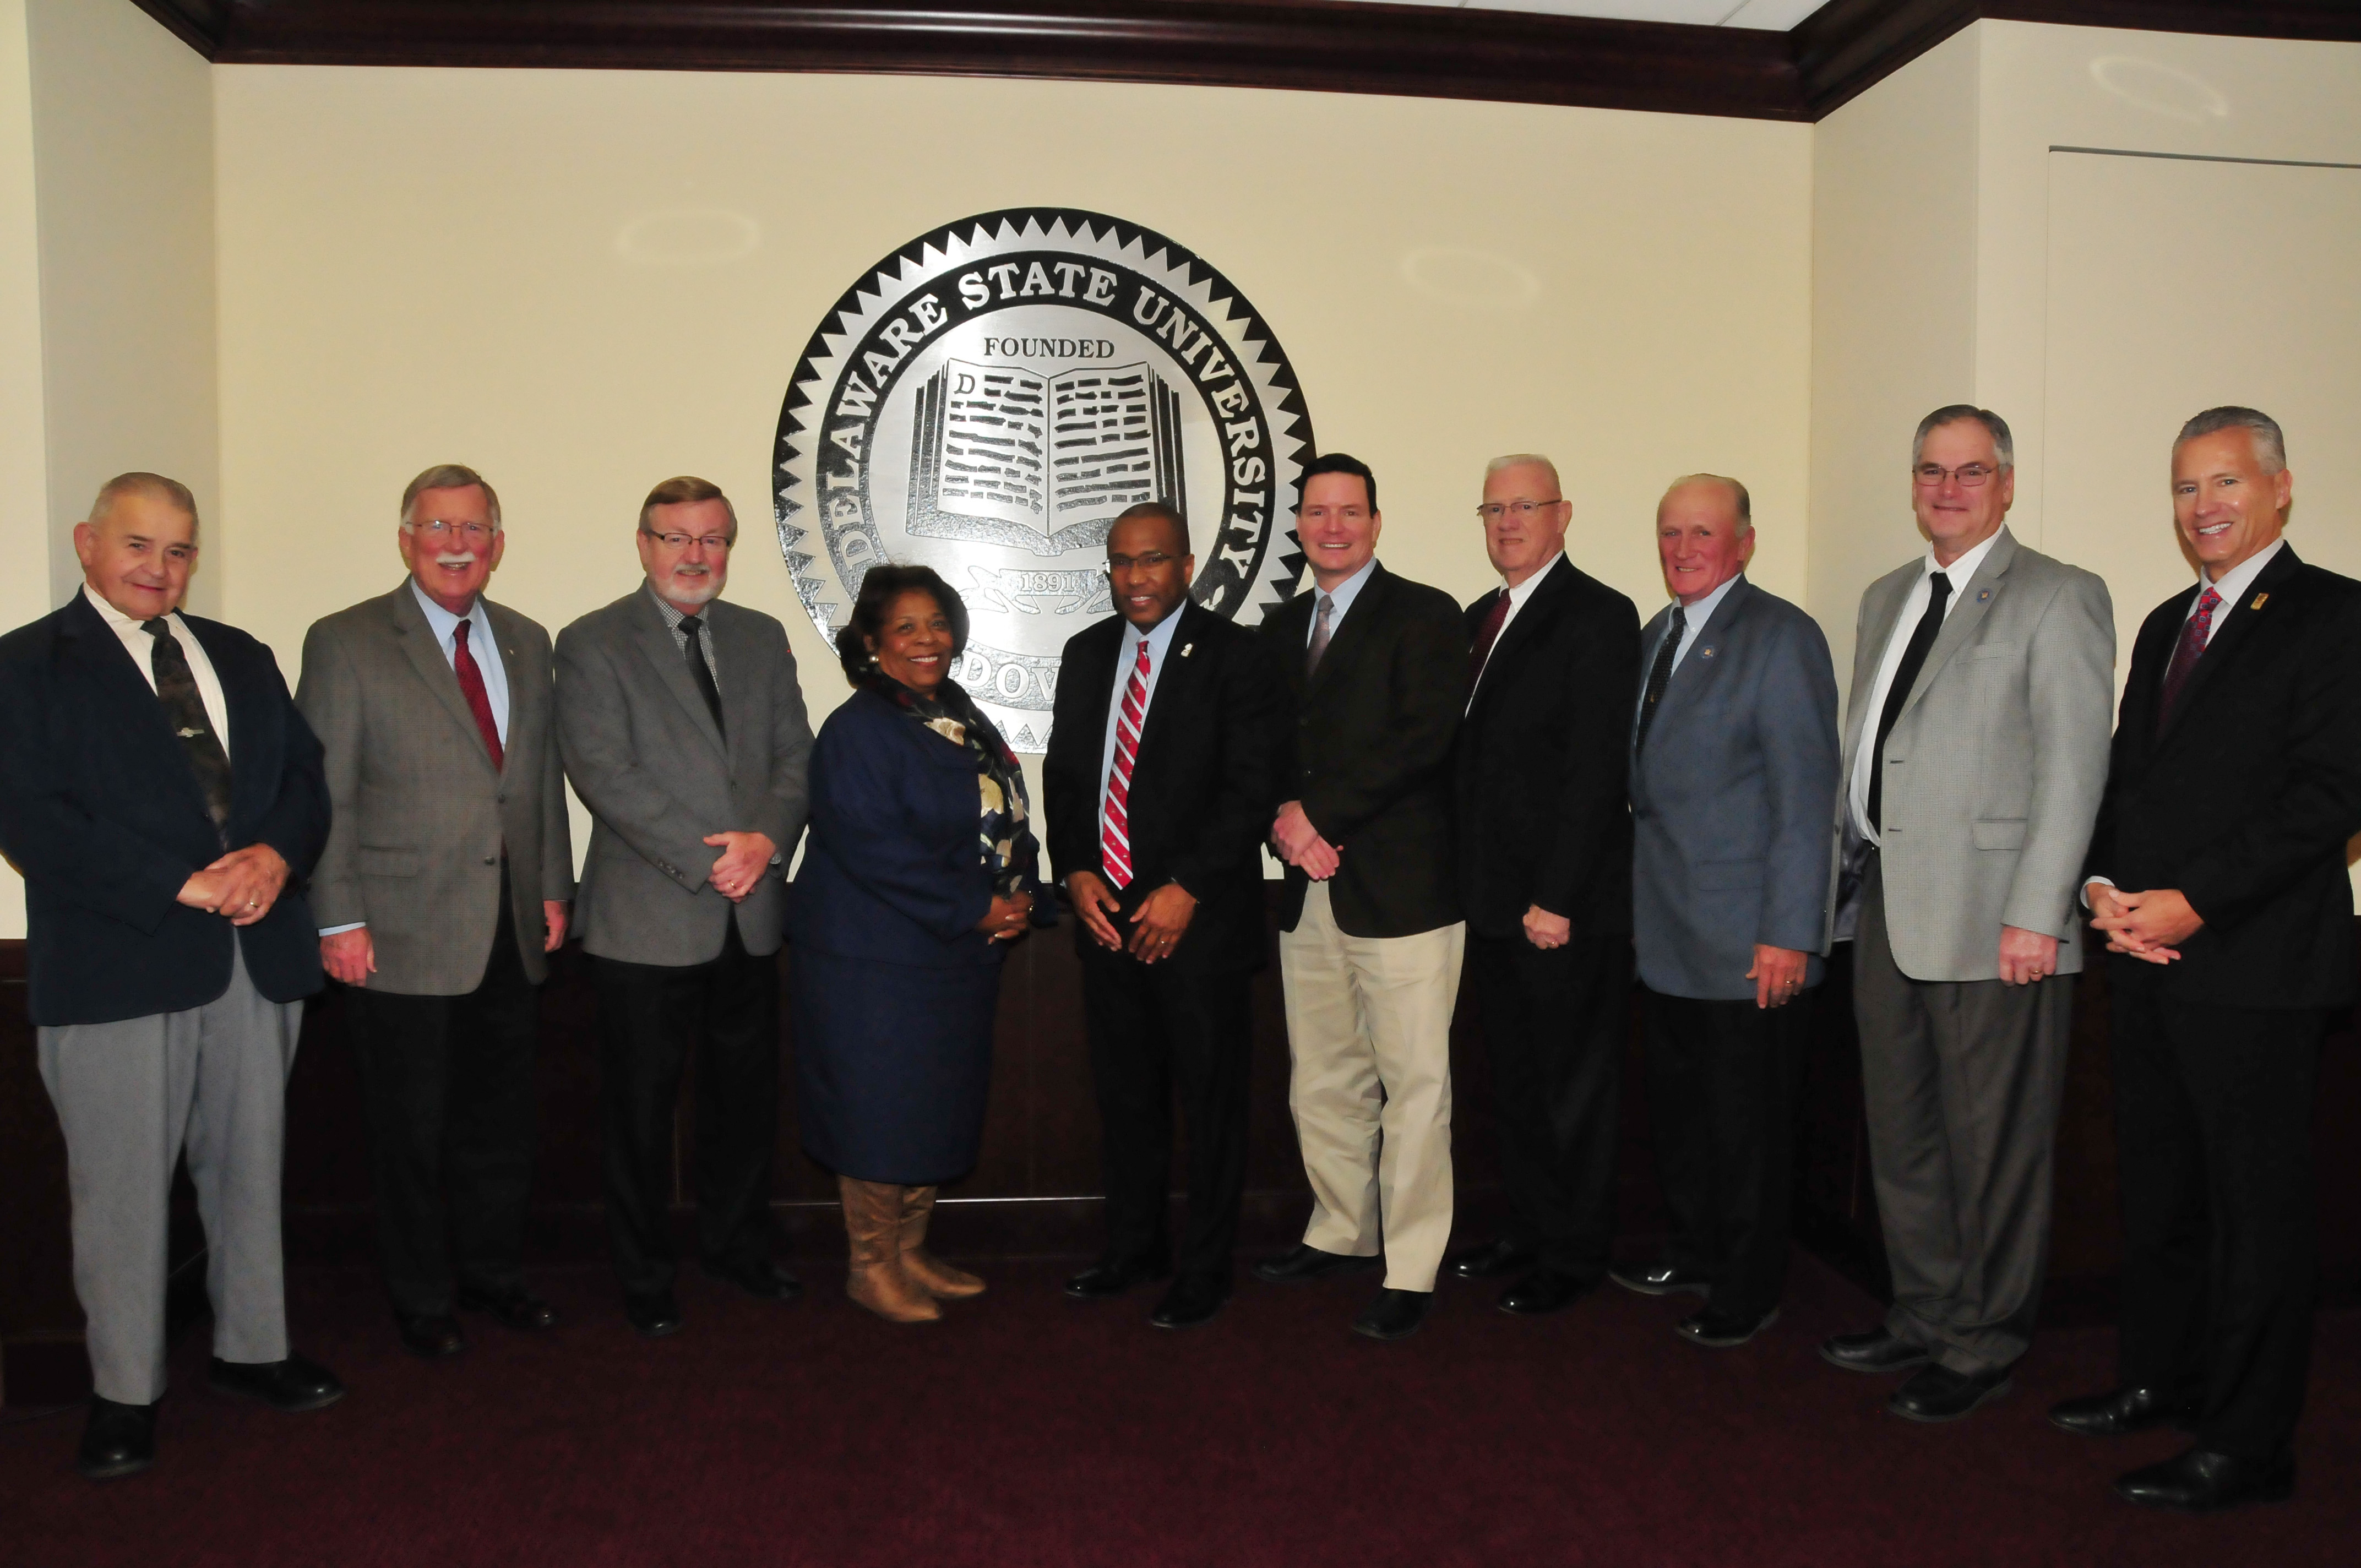 Dr. Harry L. Williams, joined by DSU Board of Trustees Chairwoman Dr. Wilma Mishoe, posed with a group of Kent County state legislators who held their final meeting with the outgoing DSU president on Dec. 12.